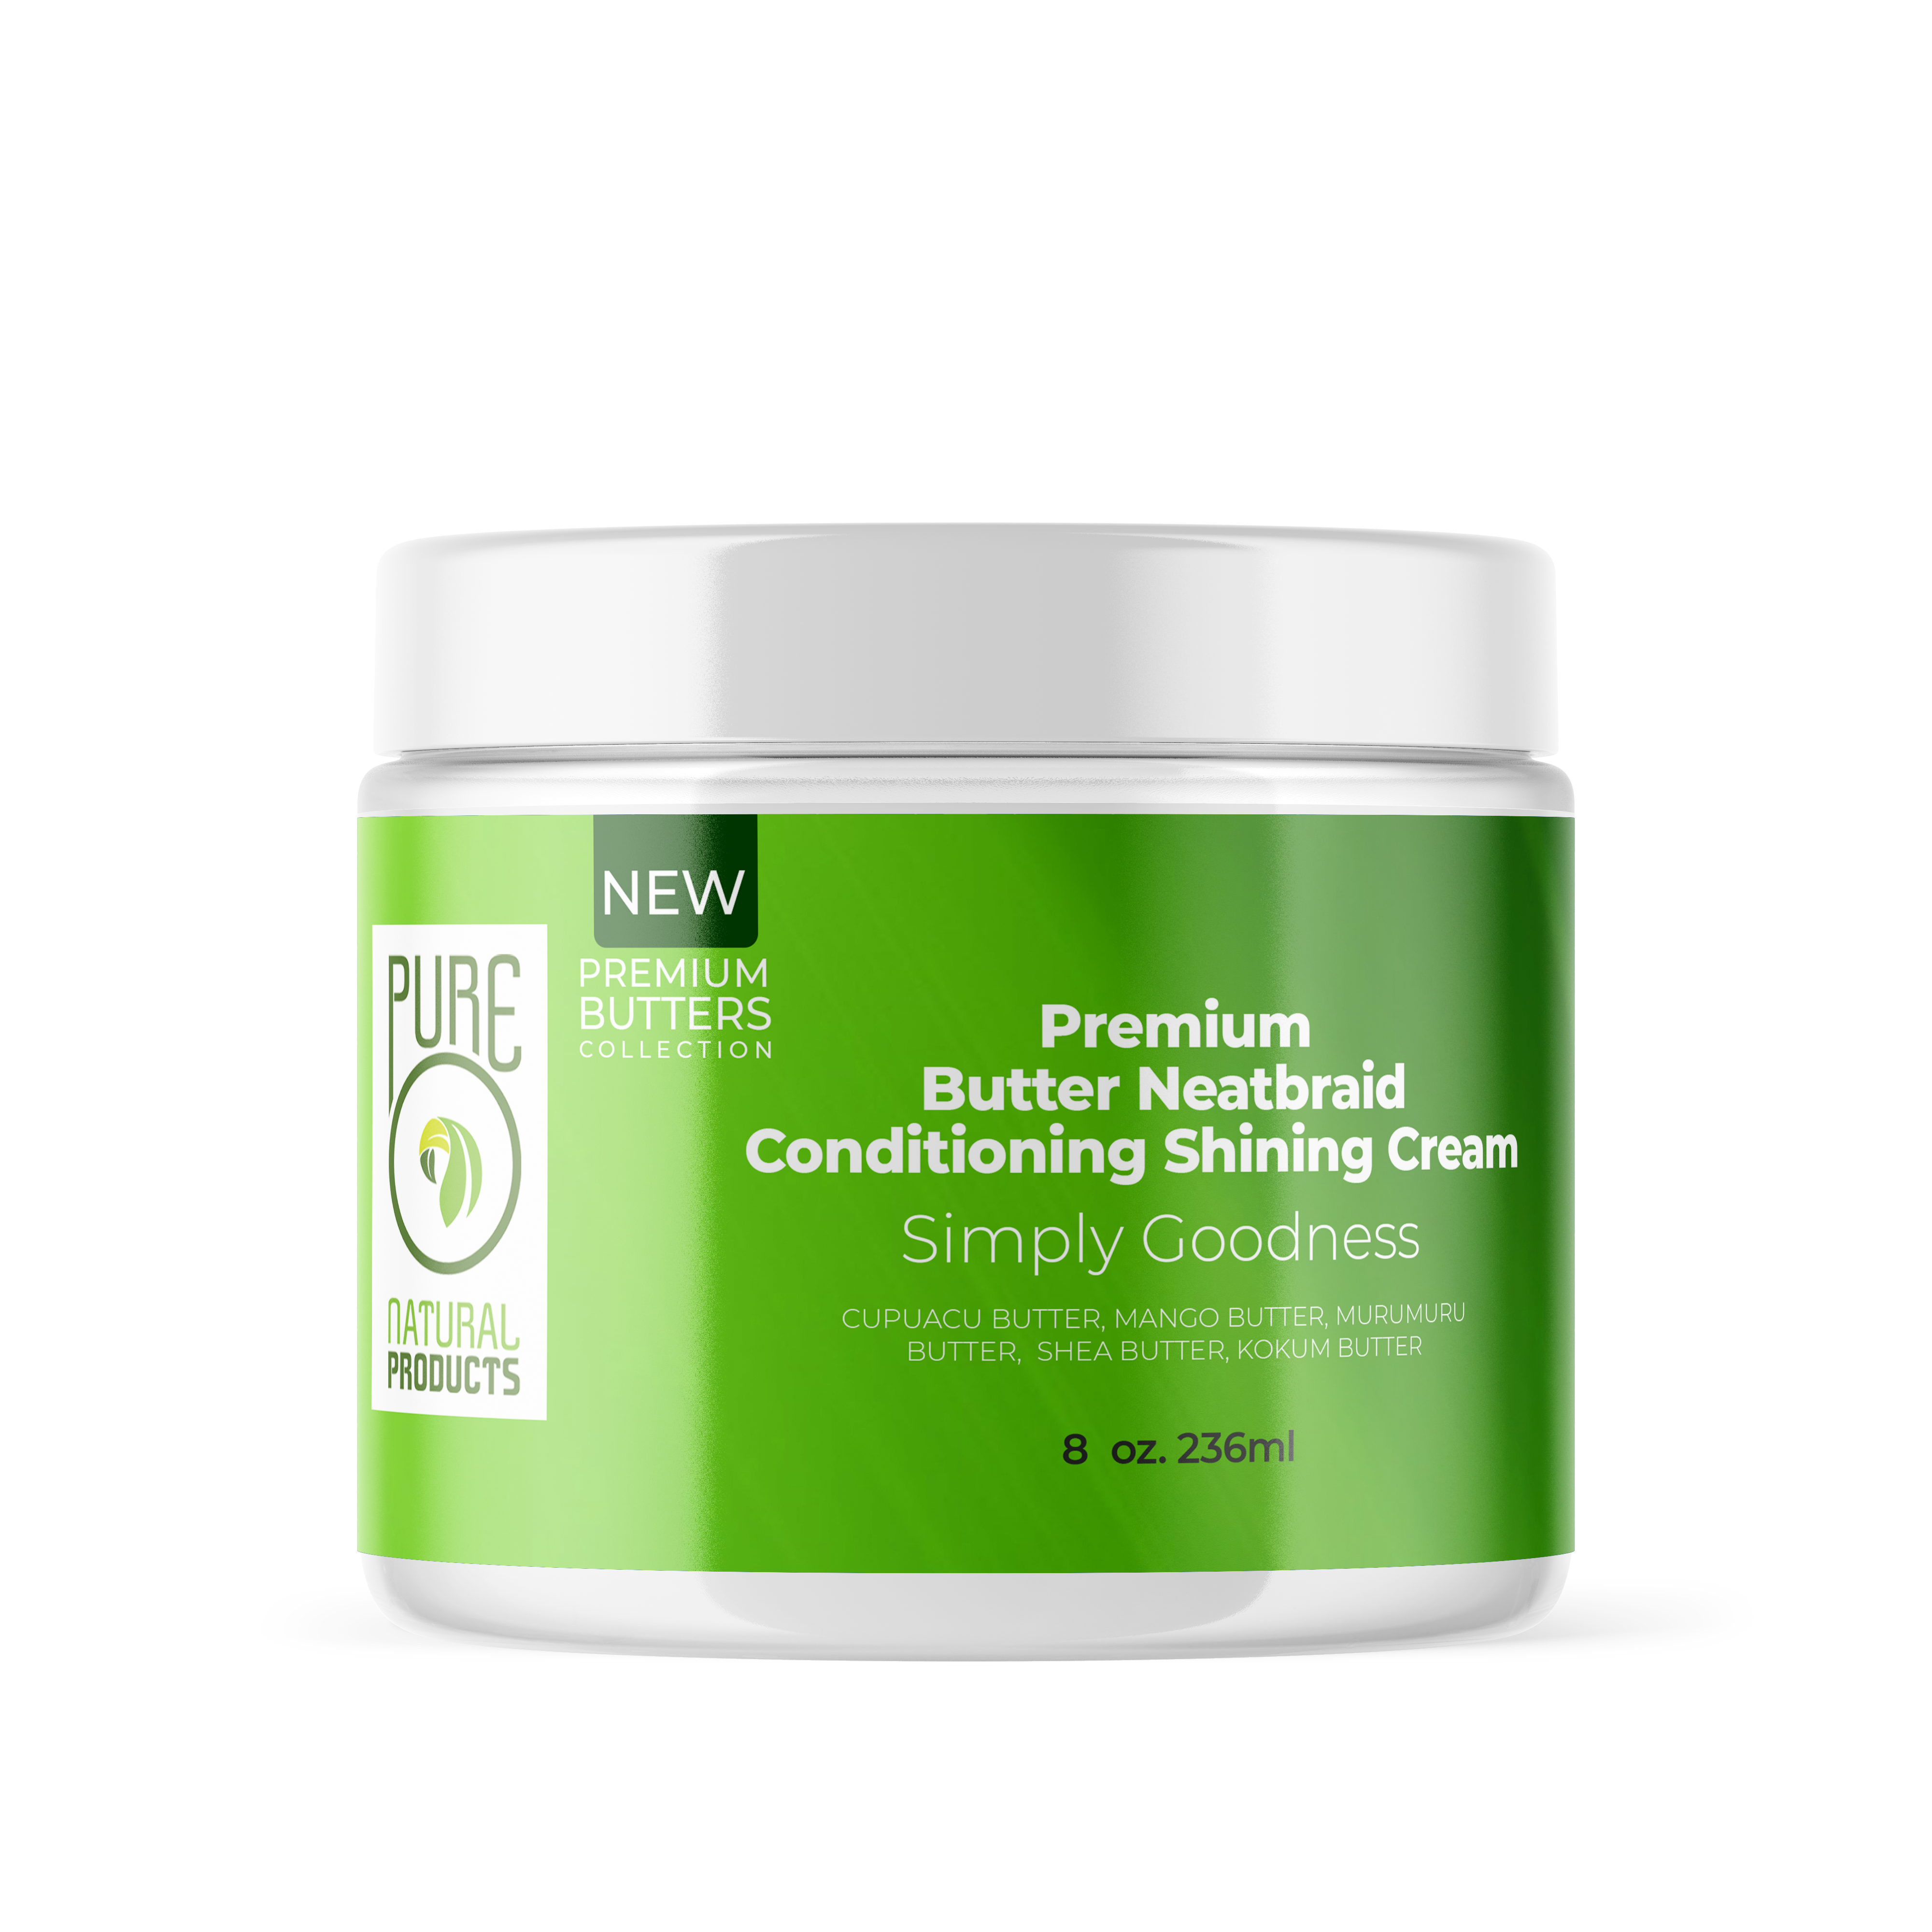 Neatbraid Conditioning Shinning gel – PureO Natural Products